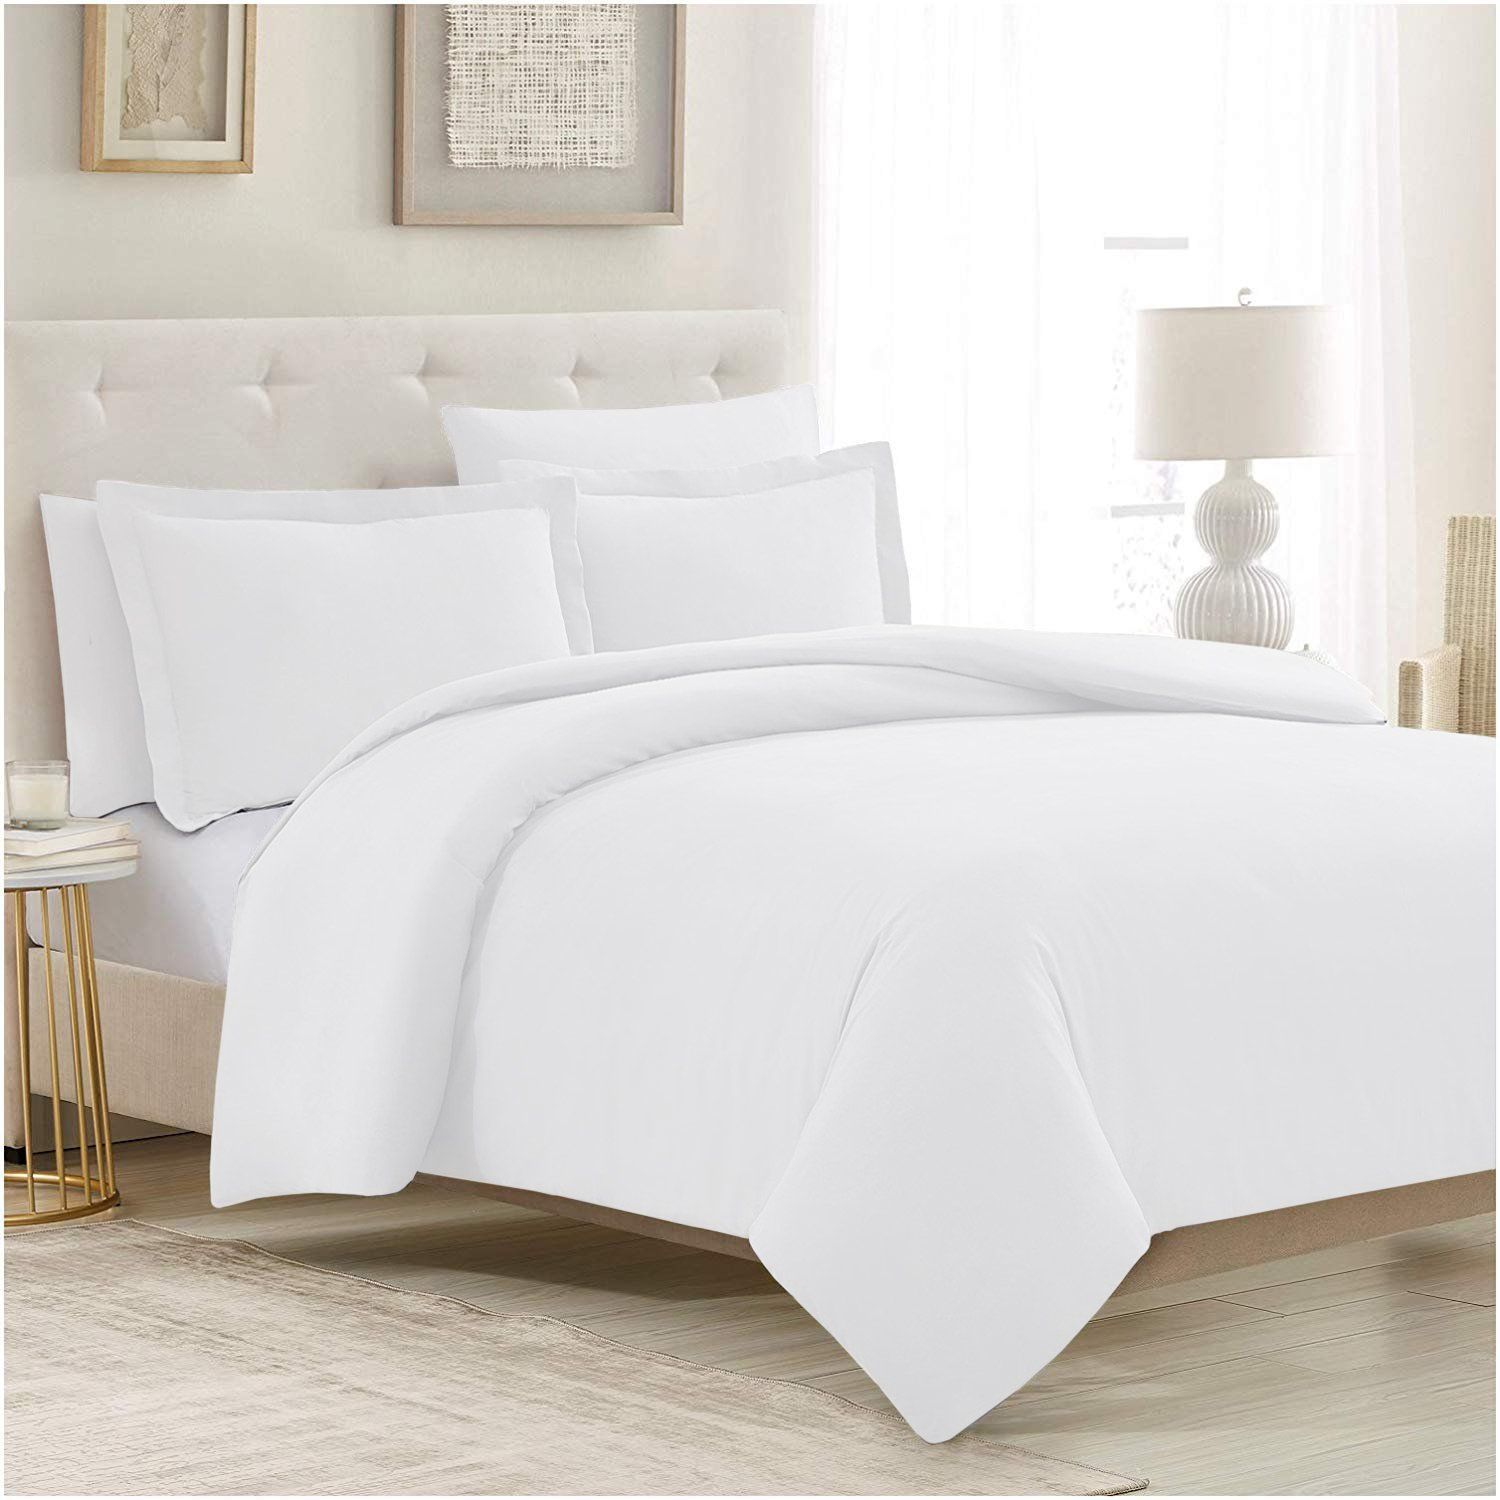 10 Best Duvet Covers Top Rated, Queen Duvet Cover Size